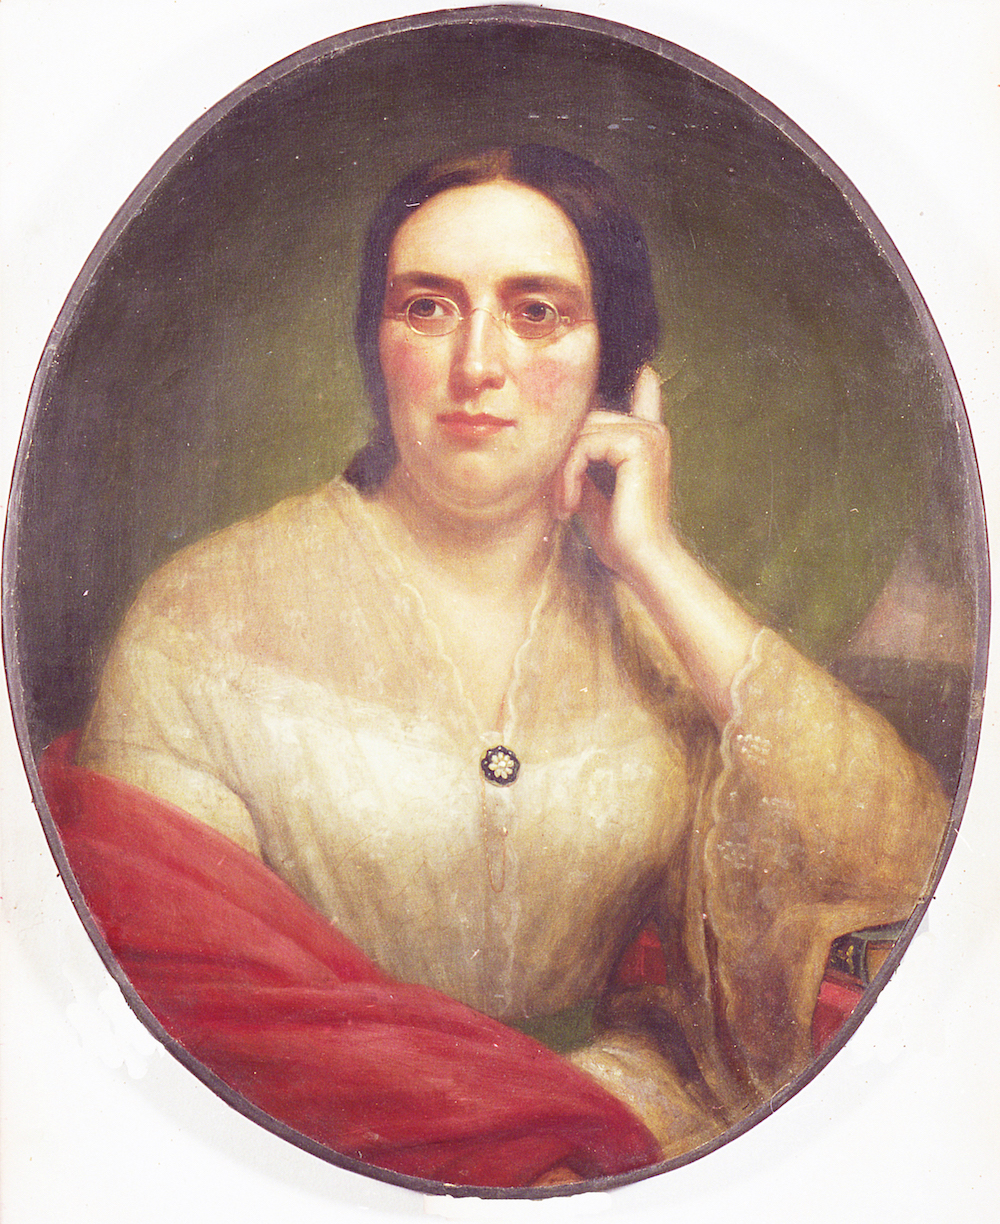 Portrait of Mary Blanchard Lynde, a woman known for her activism and reform advocacy throughout Wisconsin. 